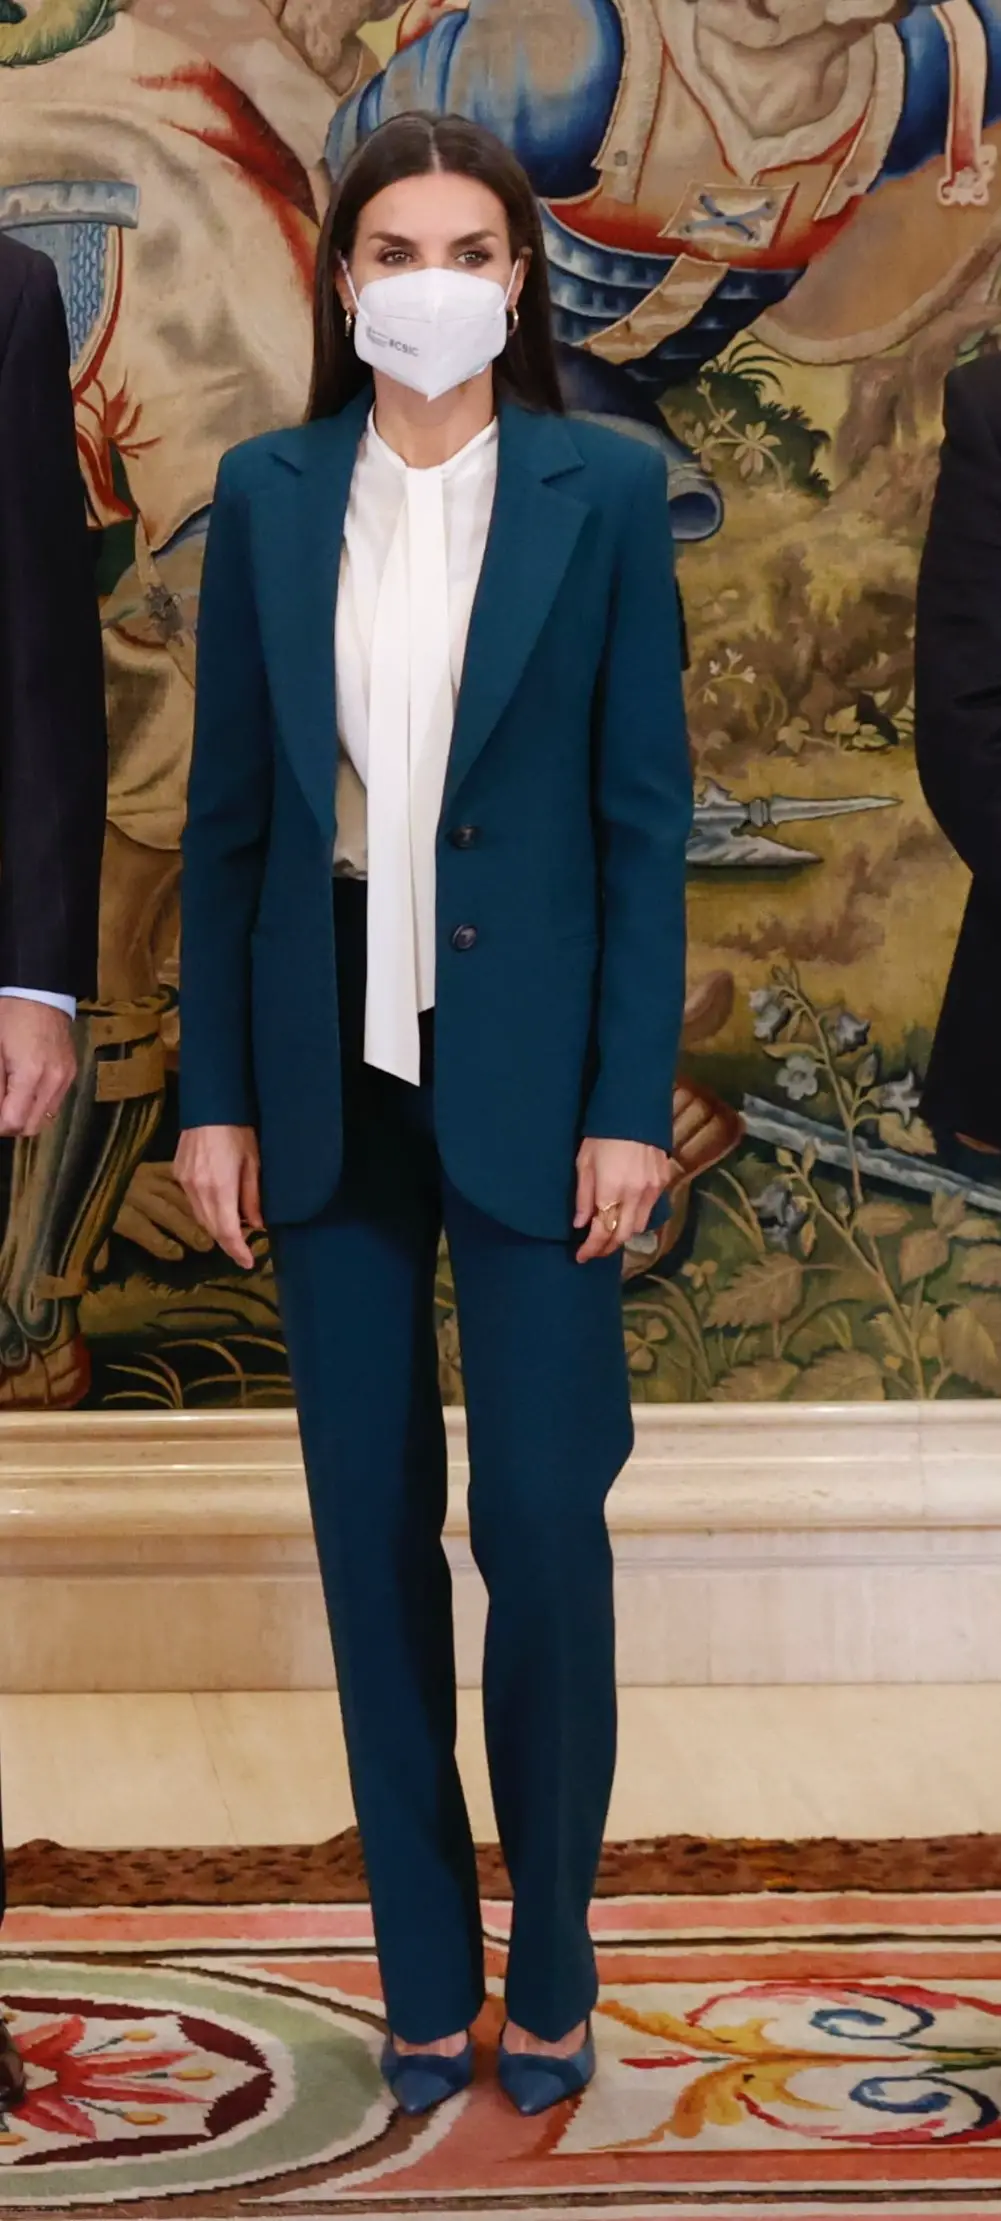 Queen Letizia chose green carolina Herrera suit for Palace engagements